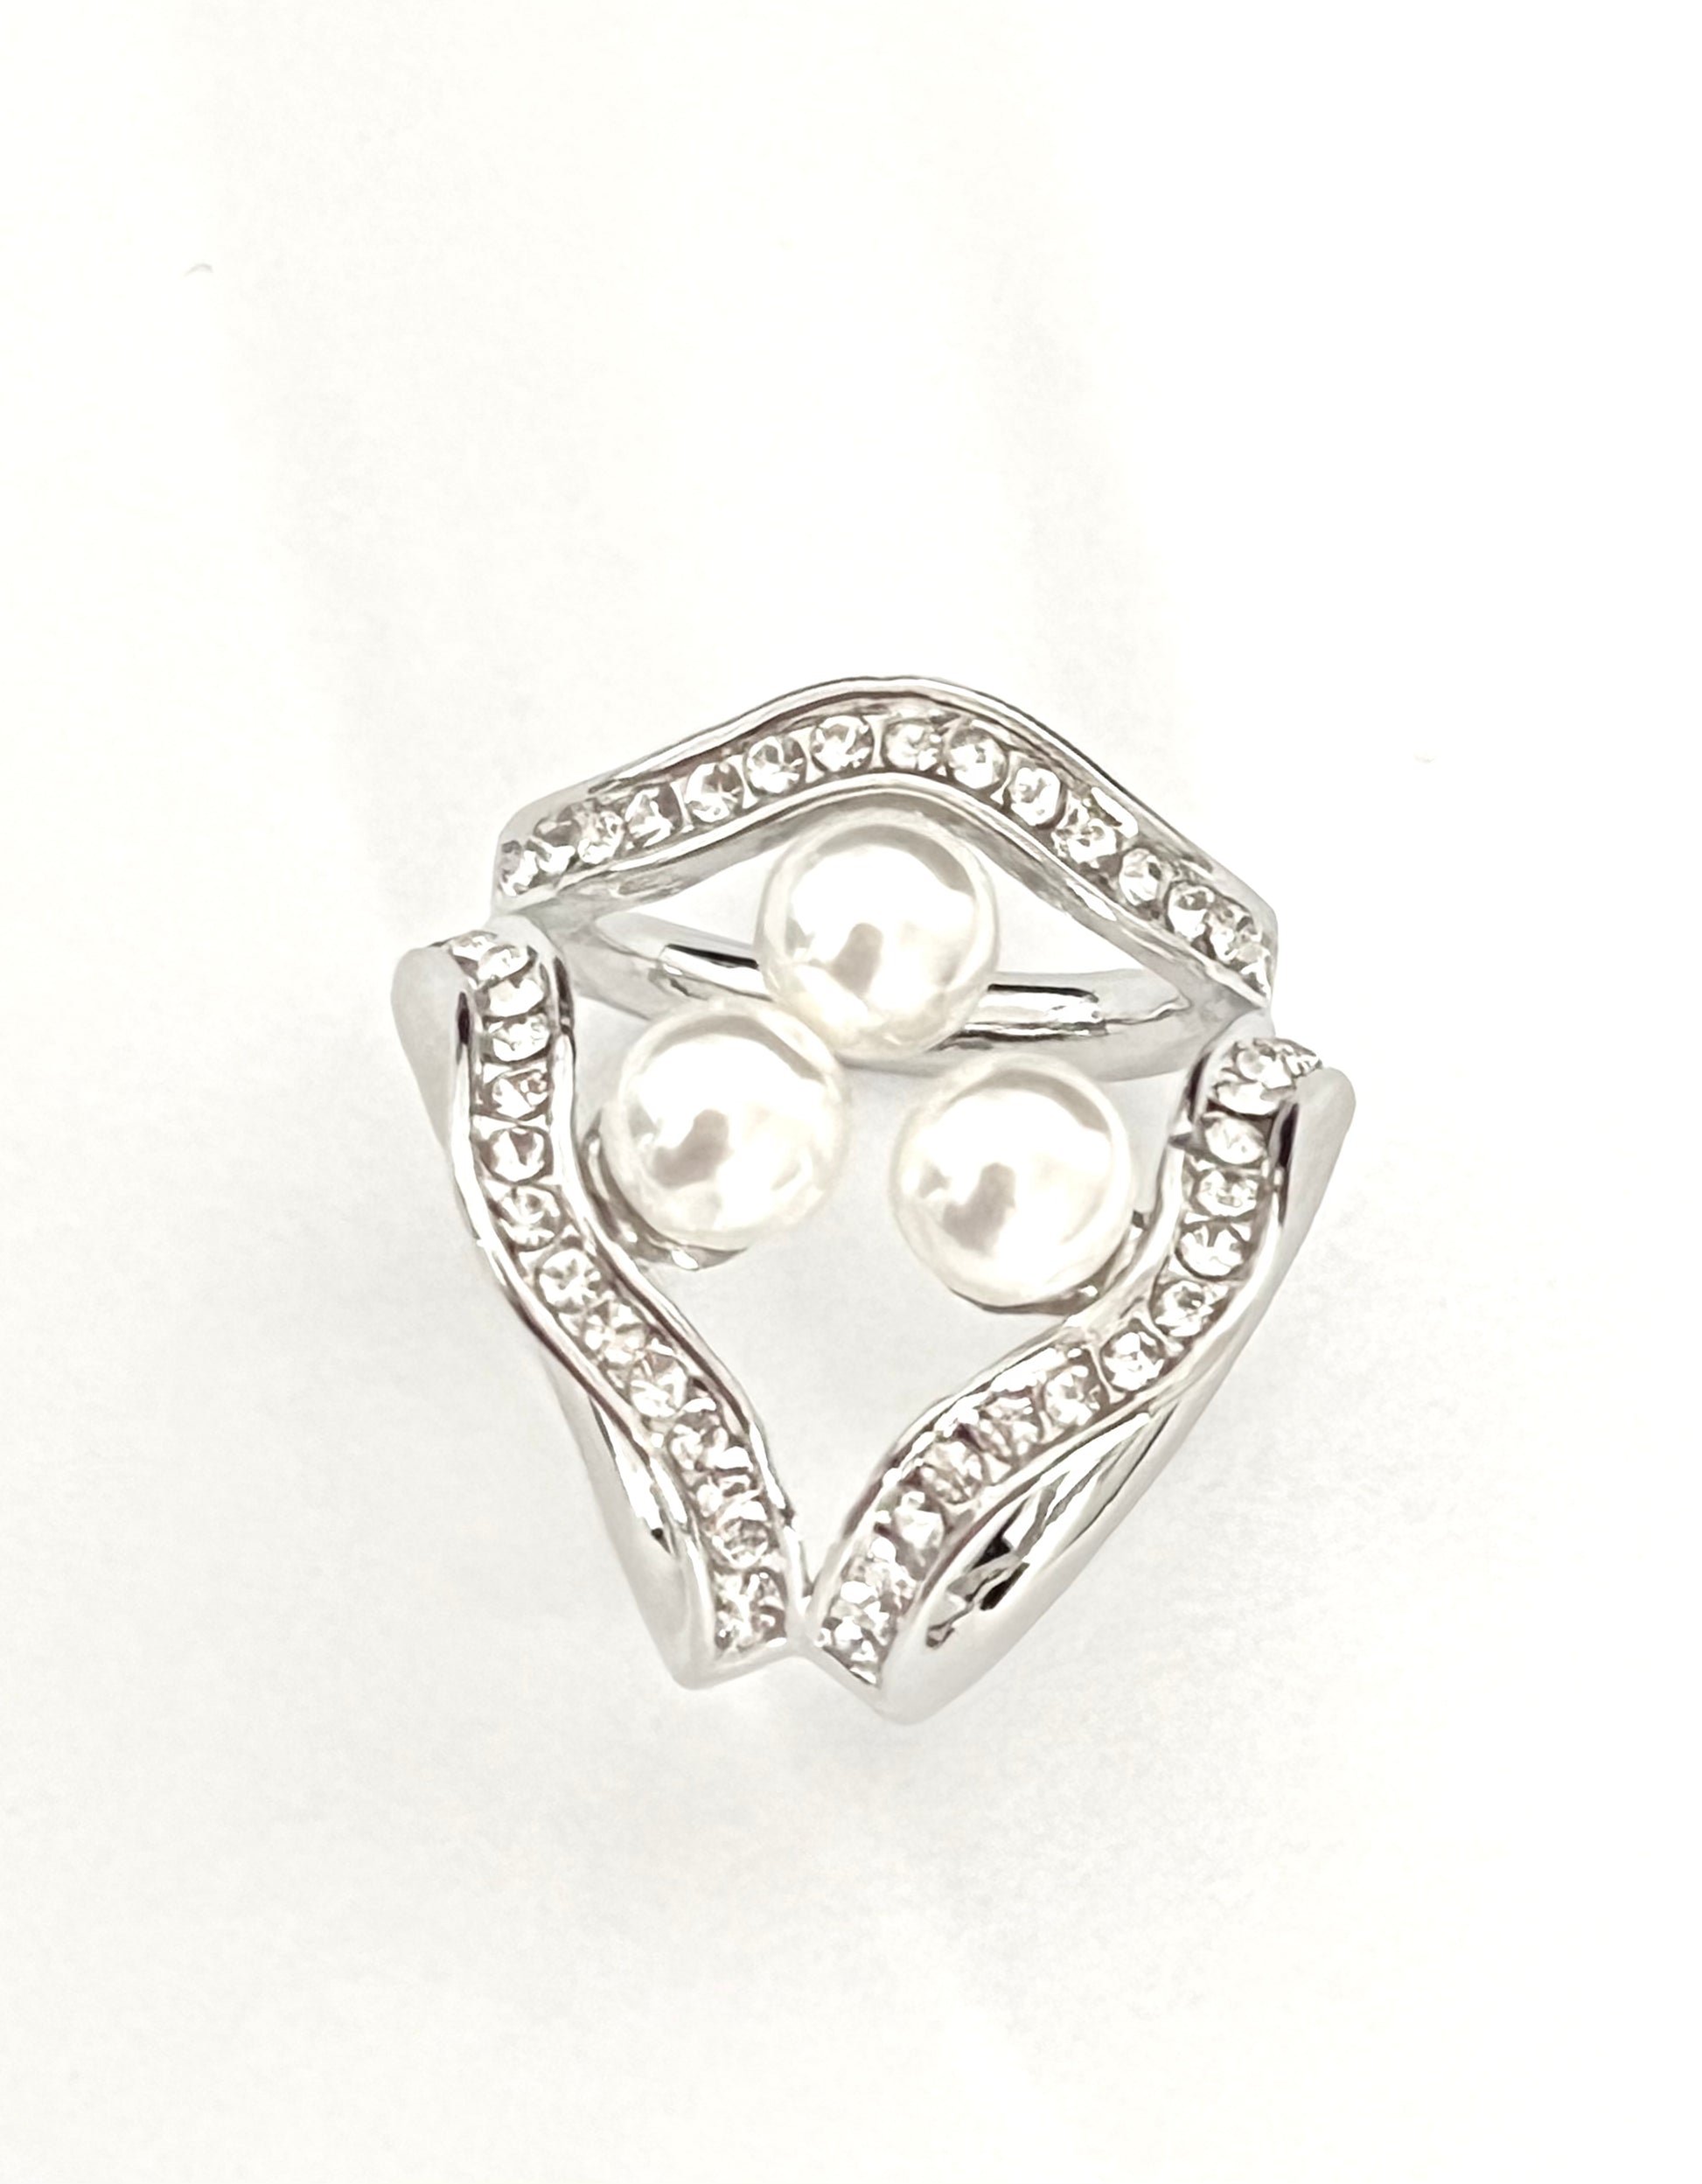 silver scarf ring